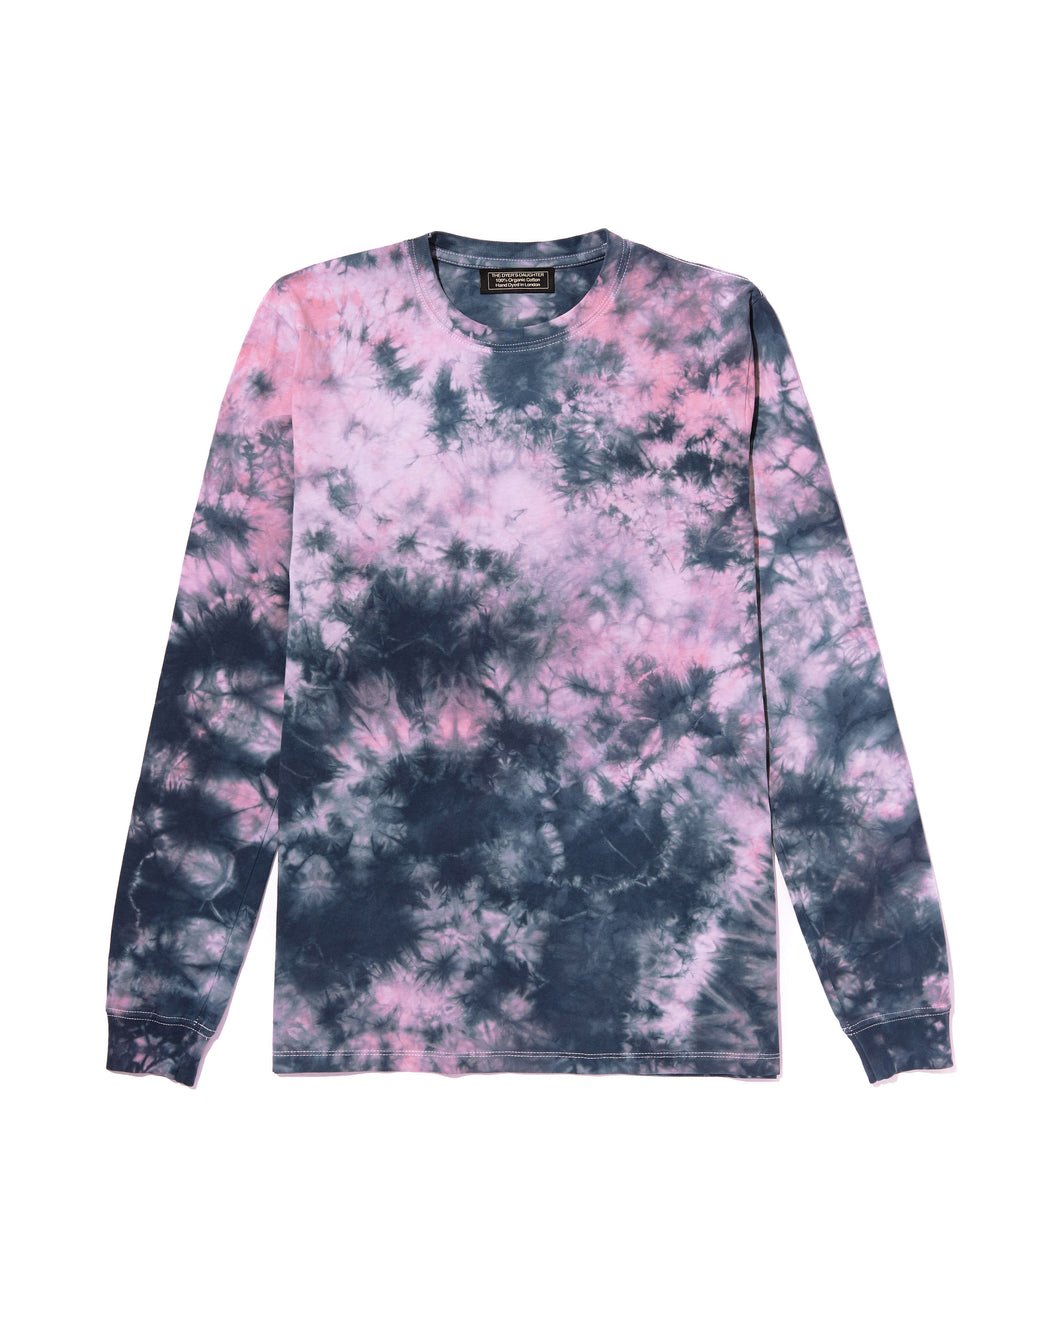 ROSE ROCK - 100% Organic Cotton Long-Sleeved Tie-Dyed Top